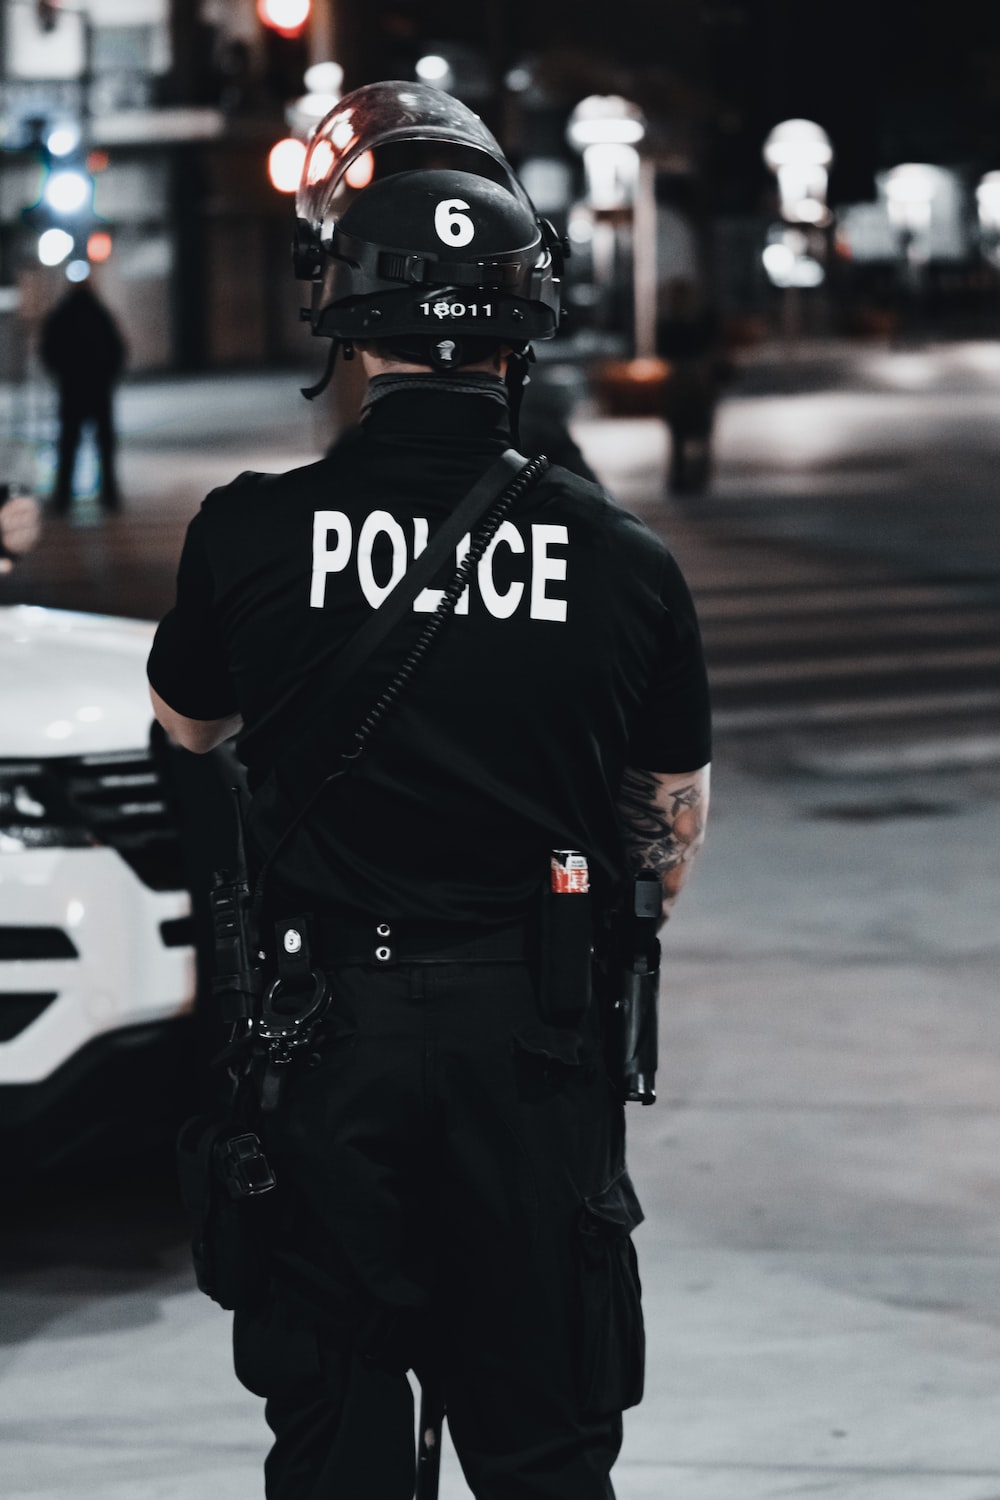 Police Wallpapers